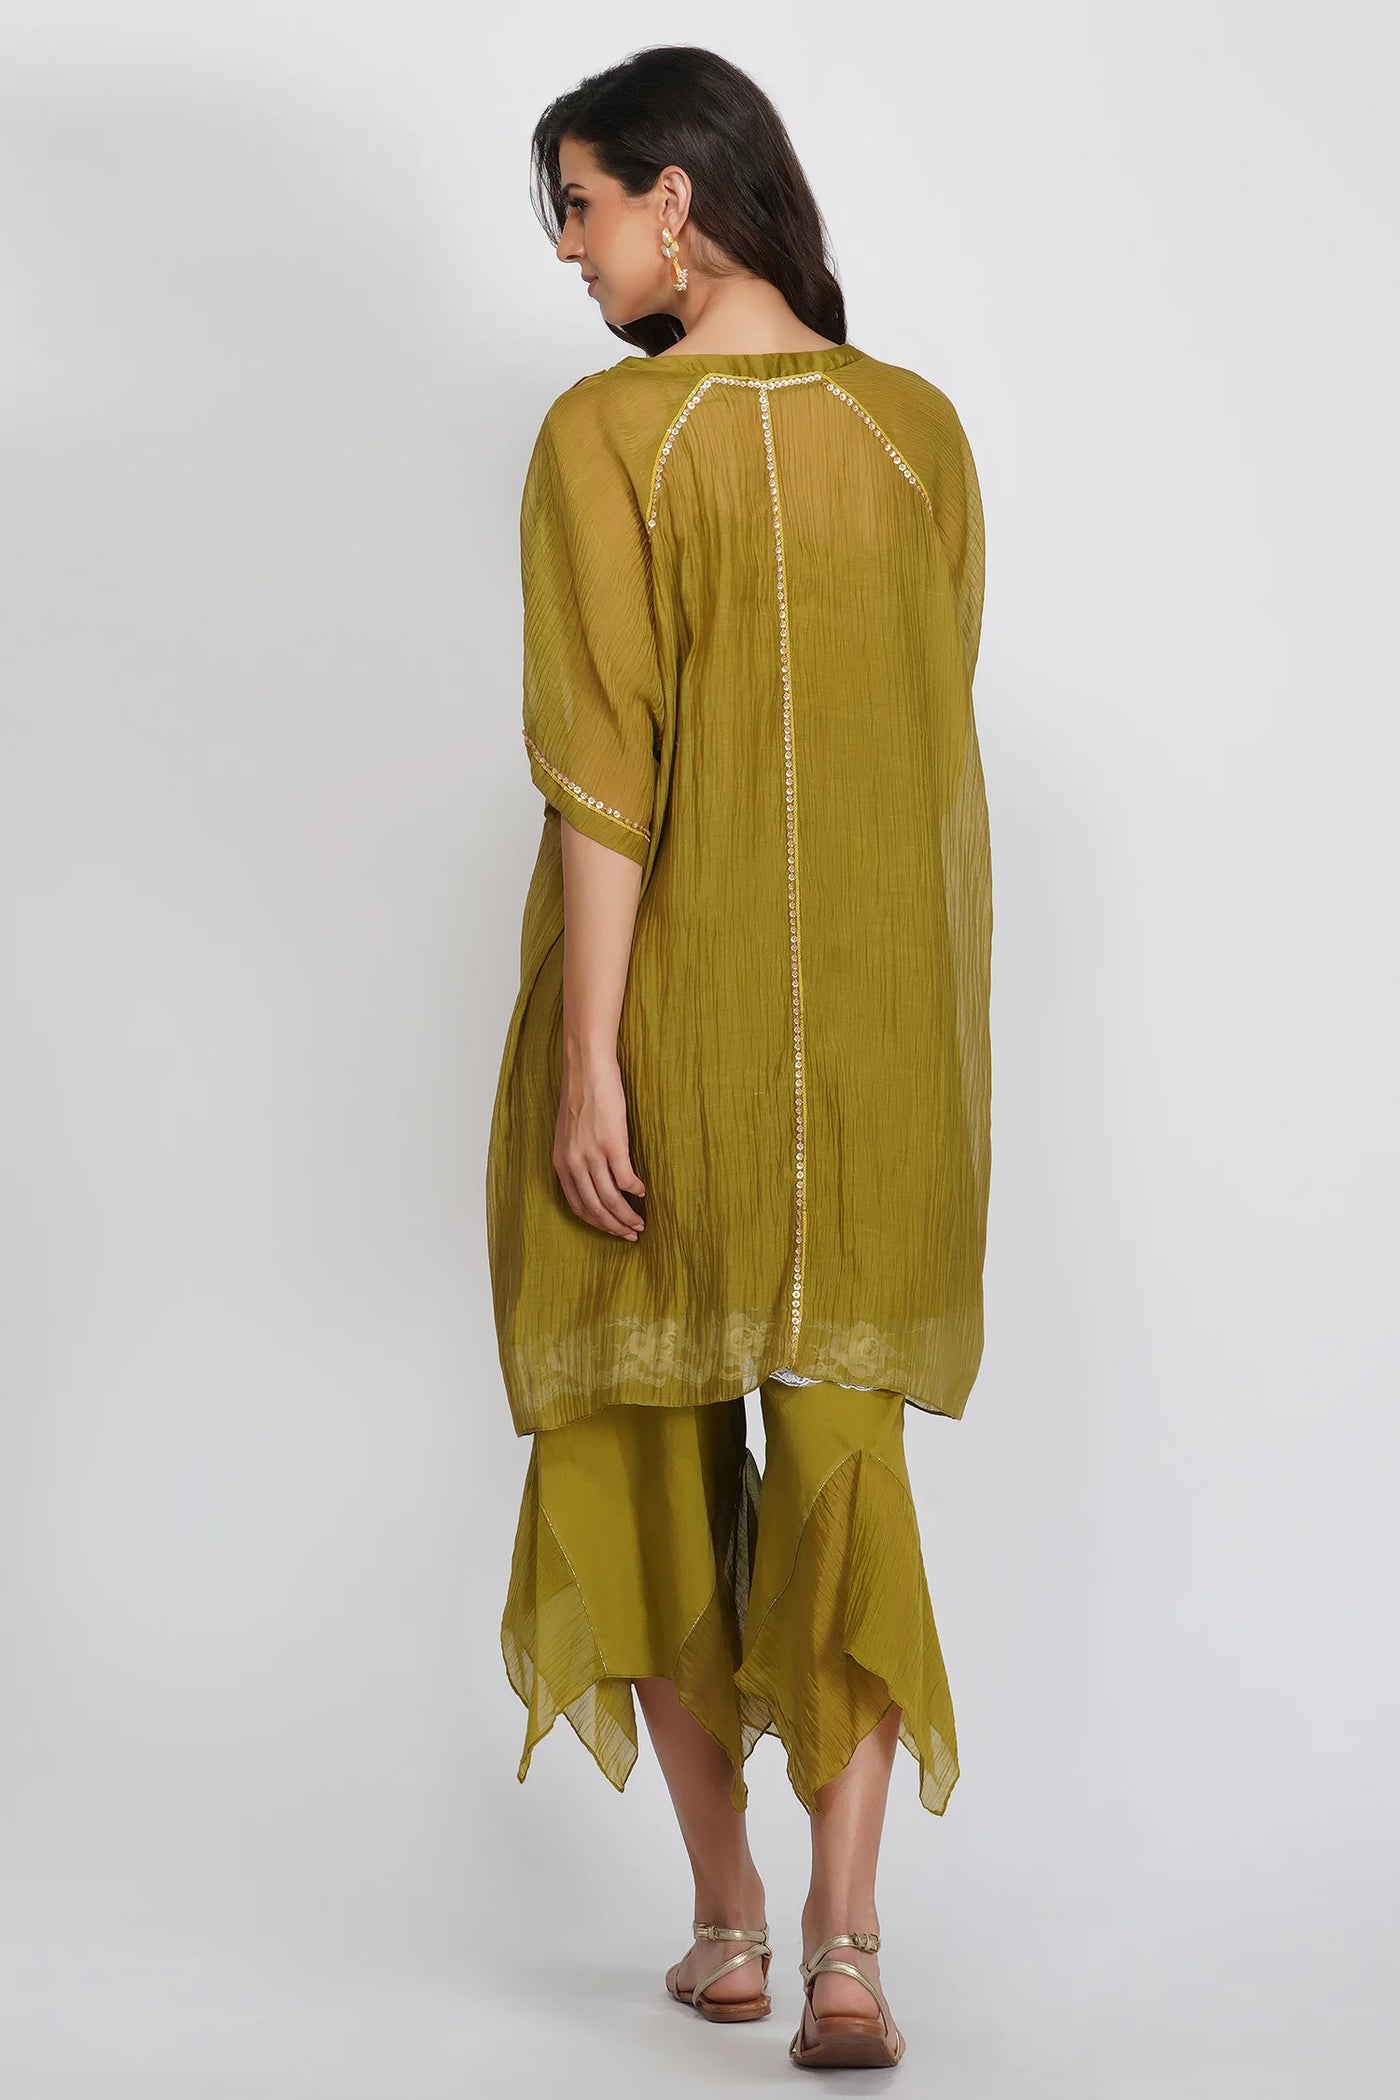 Green Asymmetric Tunic Set - Indian Clothing in Denver, CO, Aurora, CO, Boulder, CO, Fort Collins, CO, Colorado Springs, CO, Parker, CO, Highlands Ranch, CO, Cherry Creek, CO, Centennial, CO, and Longmont, CO. Nationwide shipping USA - India Fashion X